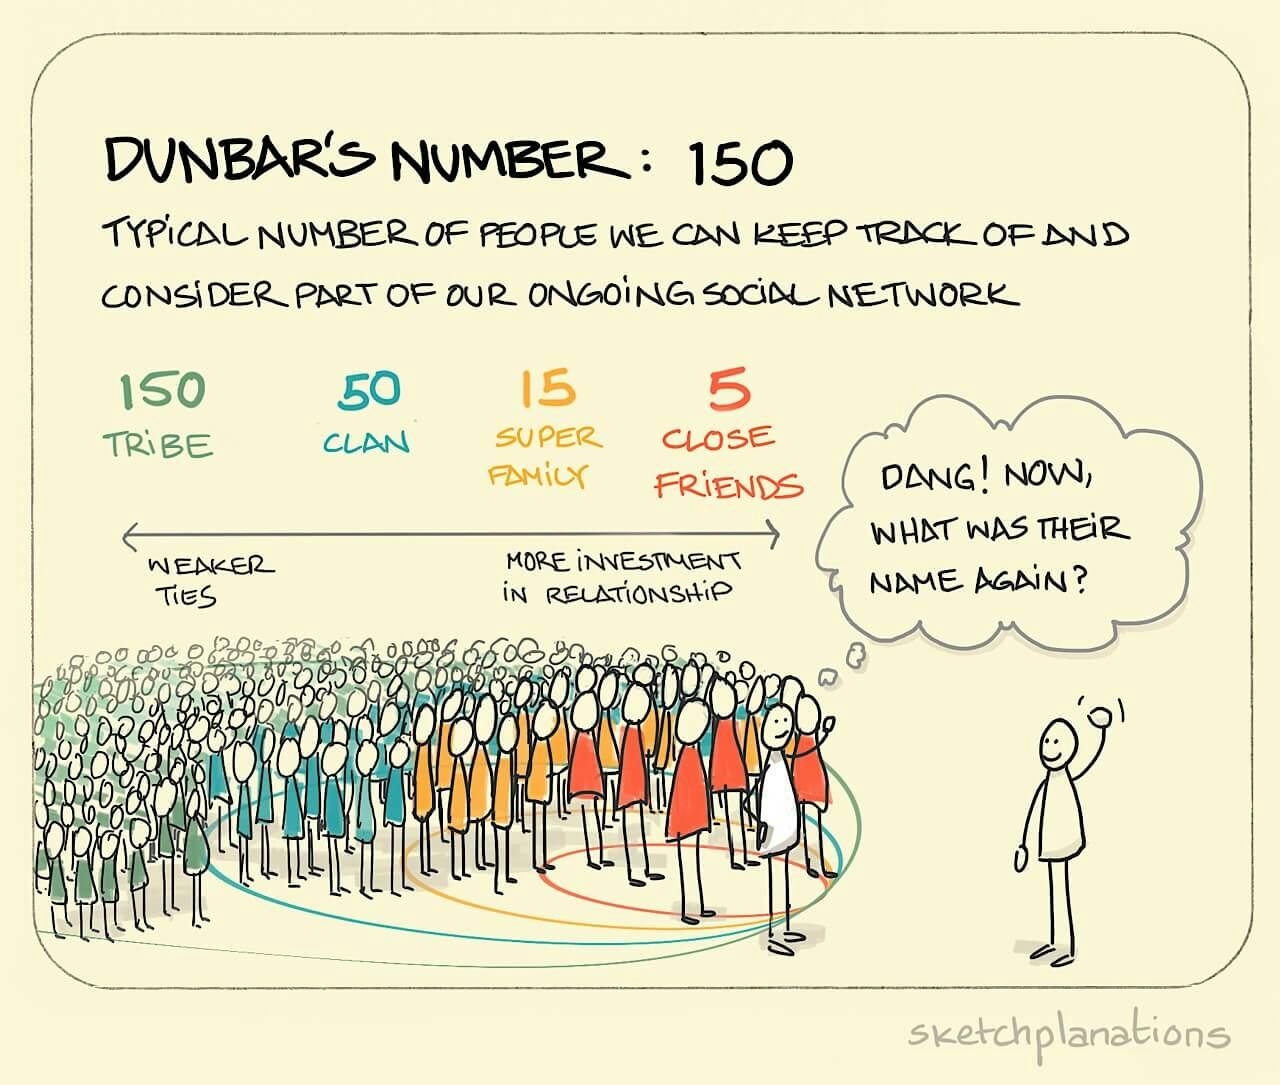 Dunbar's number: a person can't remember the name of the one person outside their circles of closer friends, super family, clan and tribe behind them